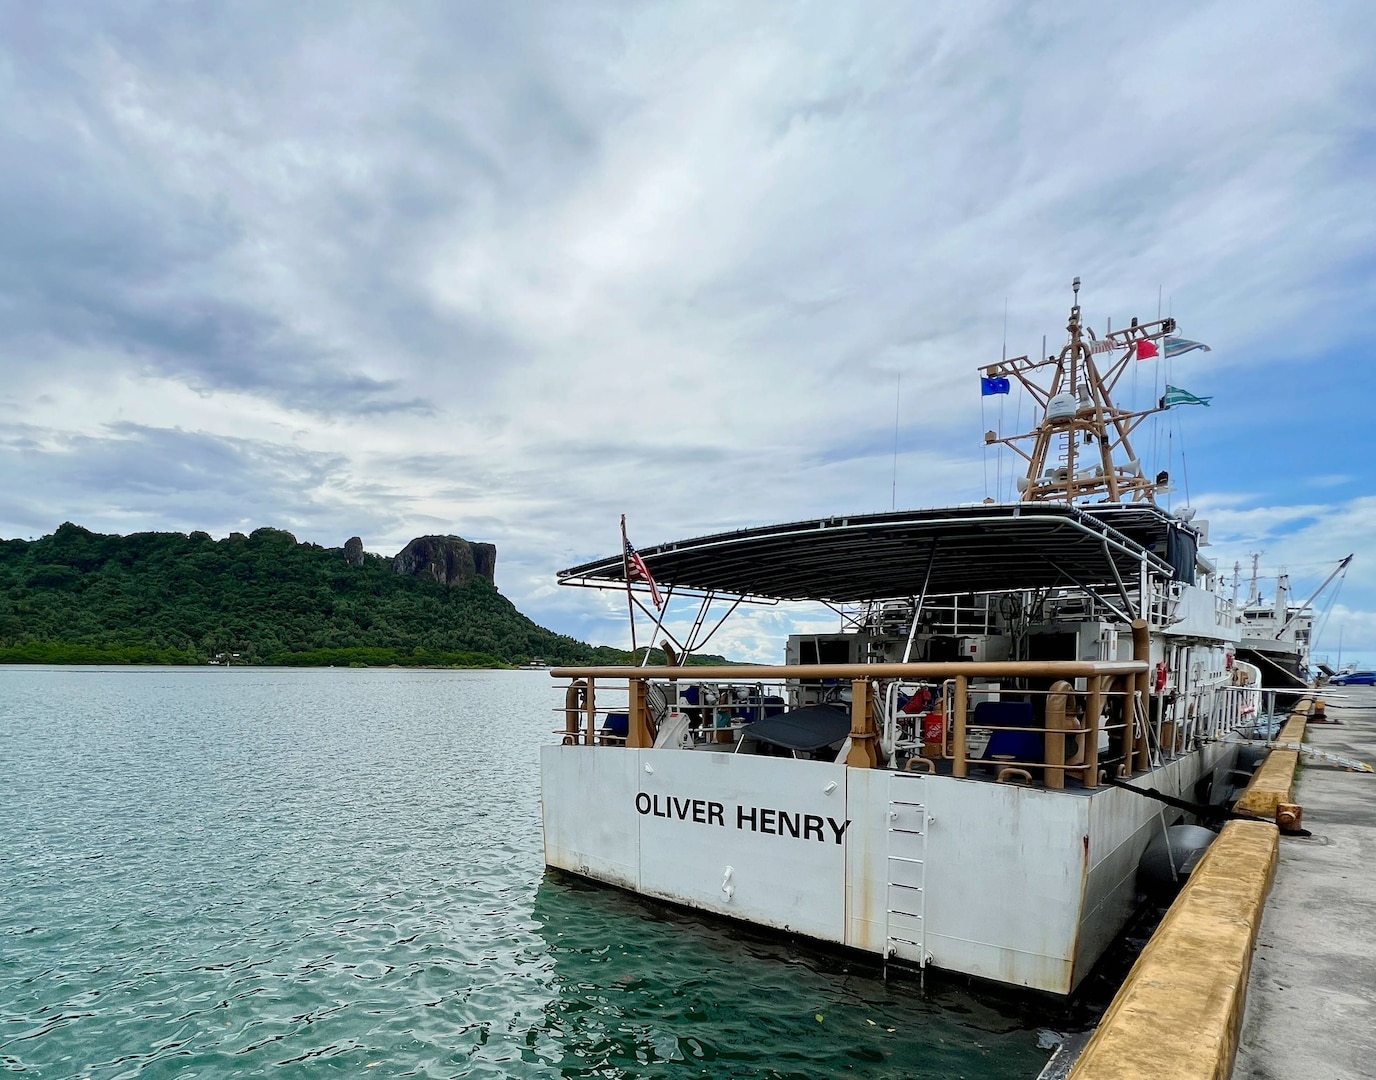 The USCGC Oliver Henry (WPC 1140) crew take on UNICEF supplies, including 39 Schools-in-a-Box, 31 Early Childhood Development, and two Recreation Kits so children can play and learn even during emergencies while in Pohnpei on Sept. 27, 2023. The team returned to homeport on Oct. 15 after a 28-day patrol reinforcing the U.S. commitment to sovereignty and resource security in the Federated States of Micronesia Exclusive Economic Zone (EEZ) and beyond. The mission, which was part of Operation Rematau and the broader U.S. Coast Guard's Operation Blue Pacific, fortifies the U.S. reputation as a reliable, trusted partner in the region. (Photo courtesy Robin Mae Magangat, U.S. Embassy Kolonia/UNICEF)